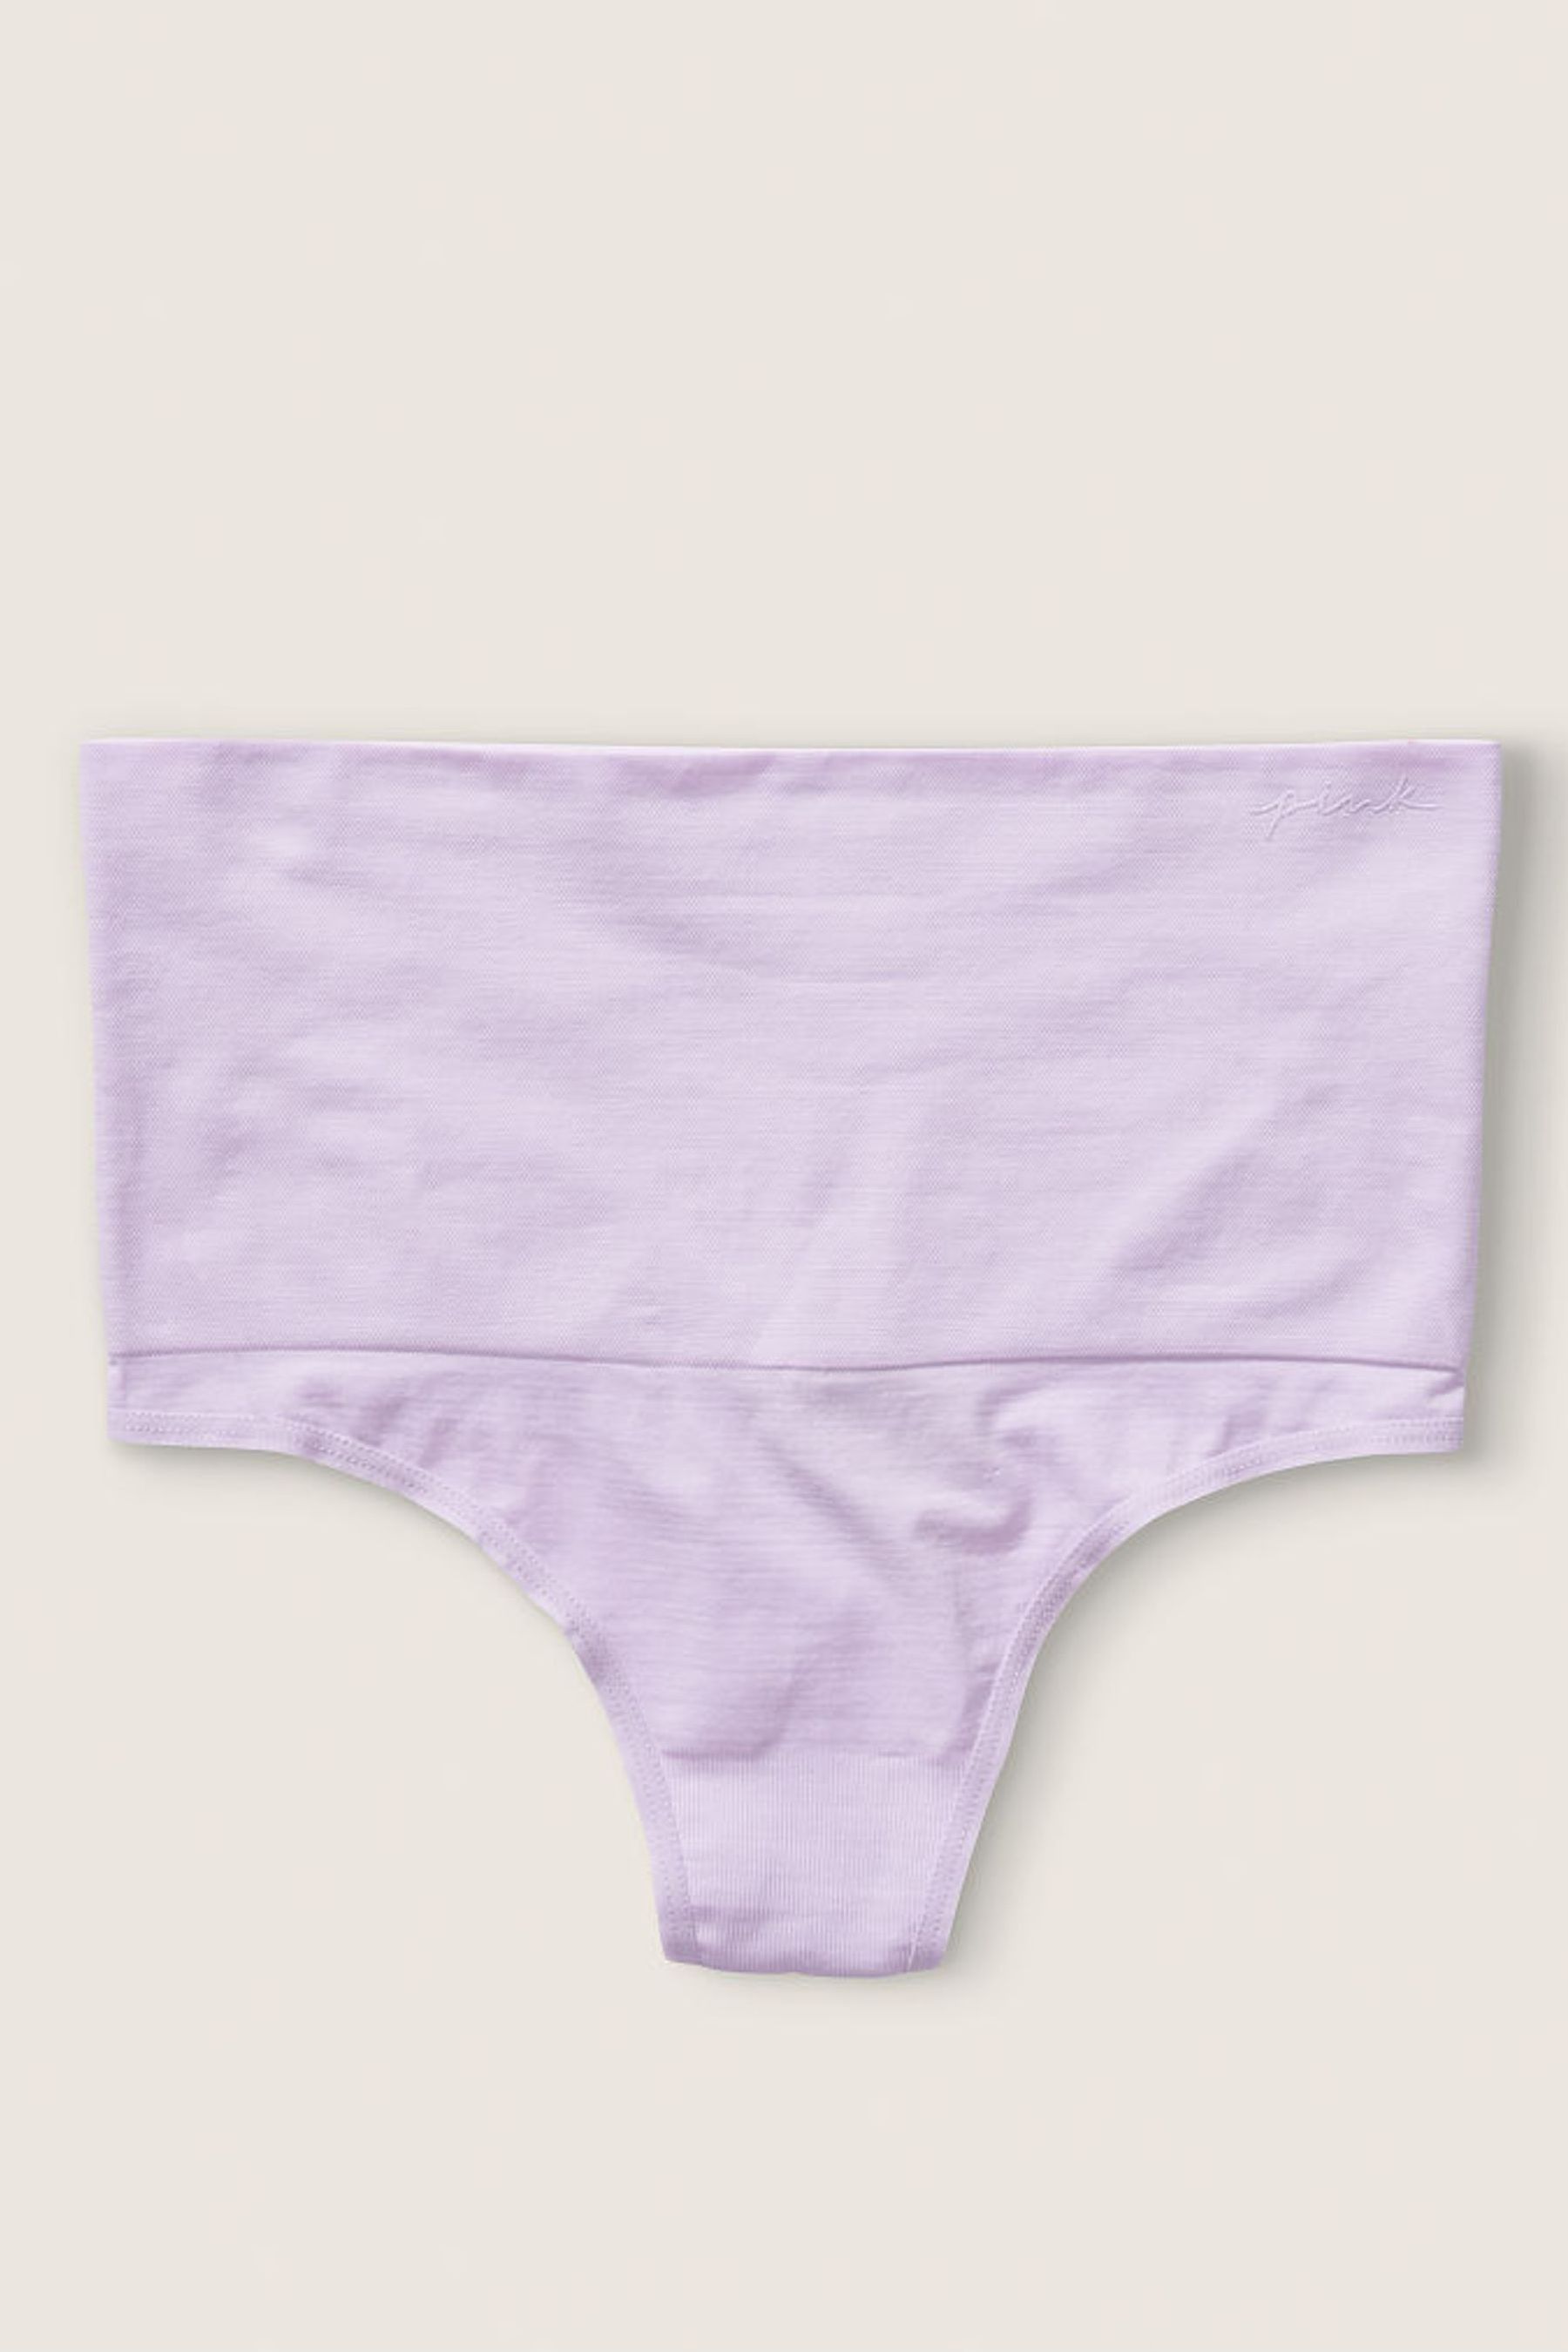 Buy Victoria's Secret PINK Seamless Shape Thong from the Victoria's ...